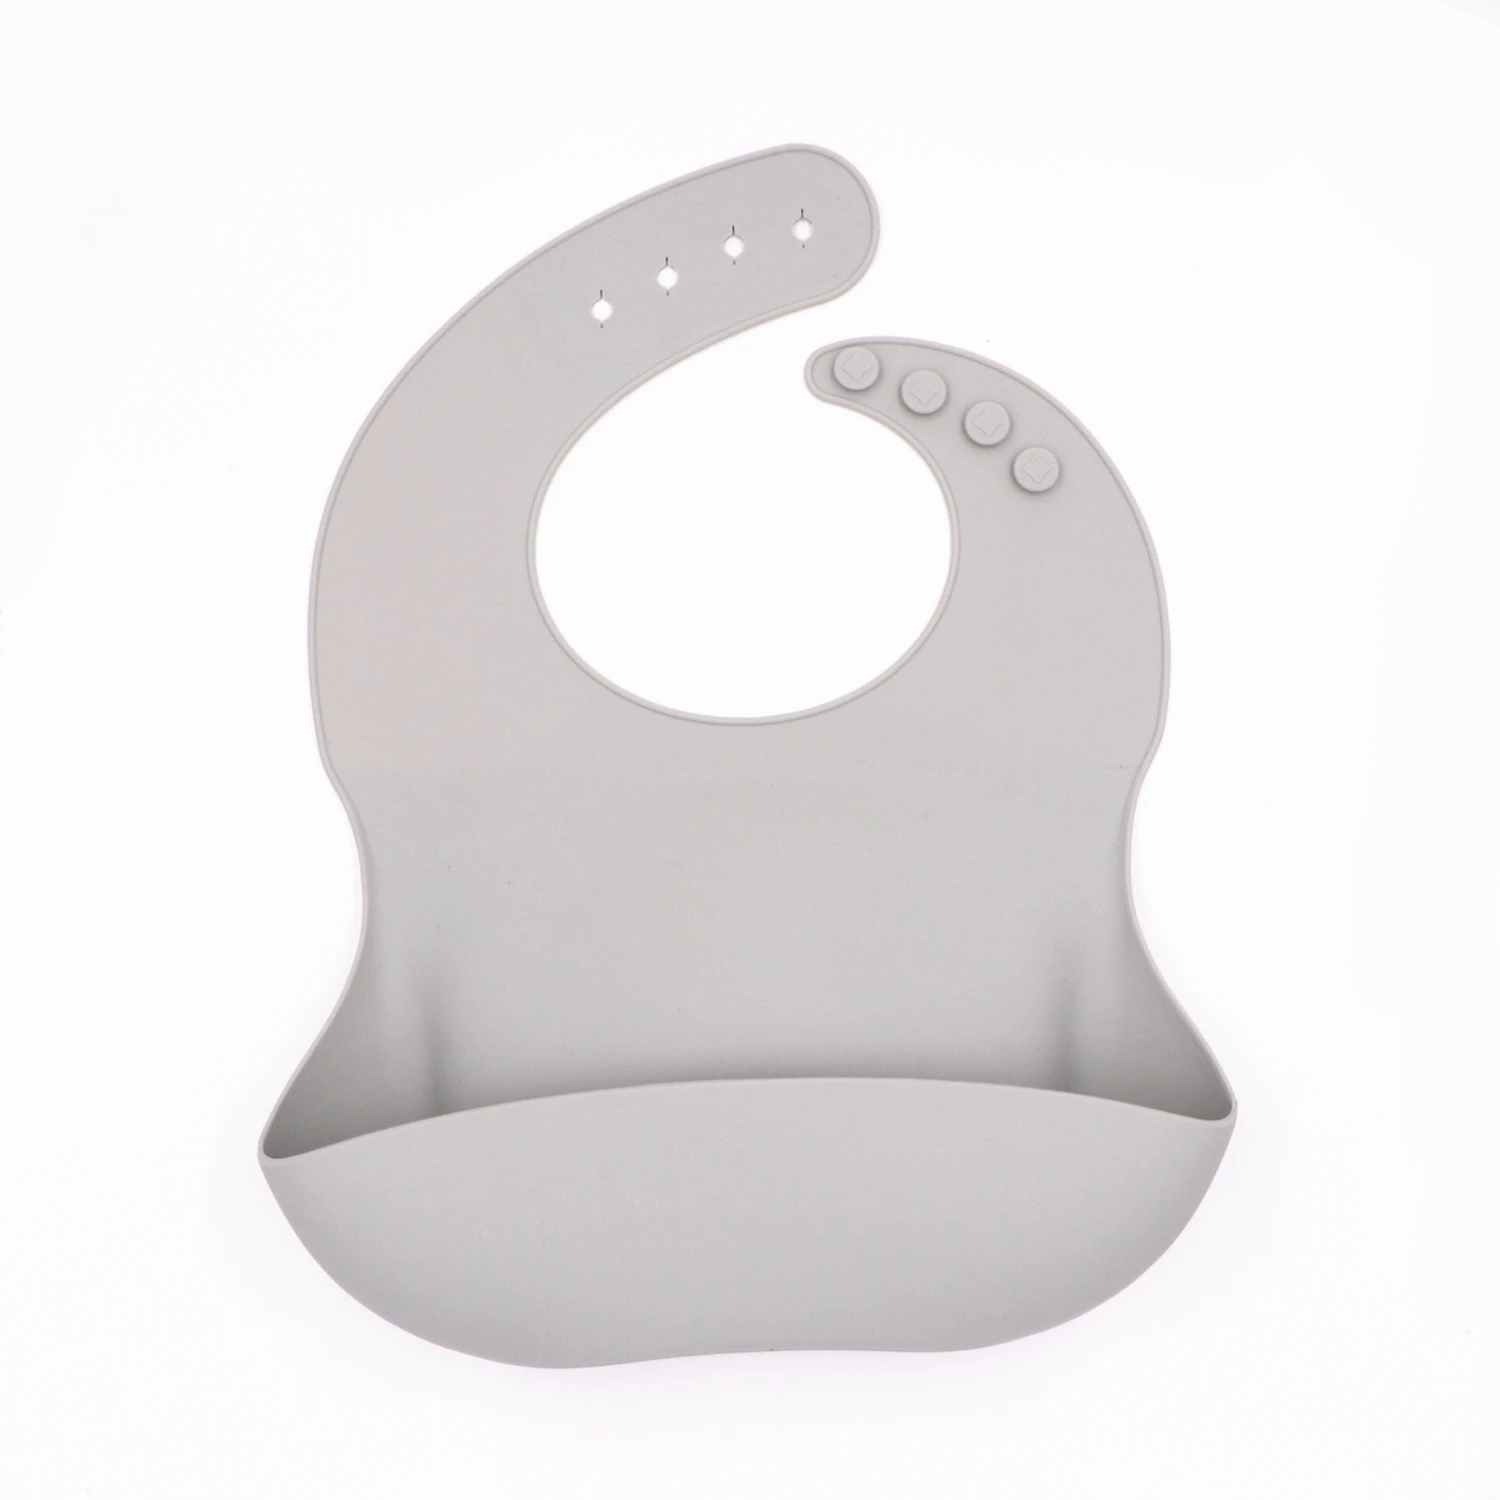 New Trend Product Silicon Bibs Waterproof Clean Wipes Easily Blank Baby Bibs